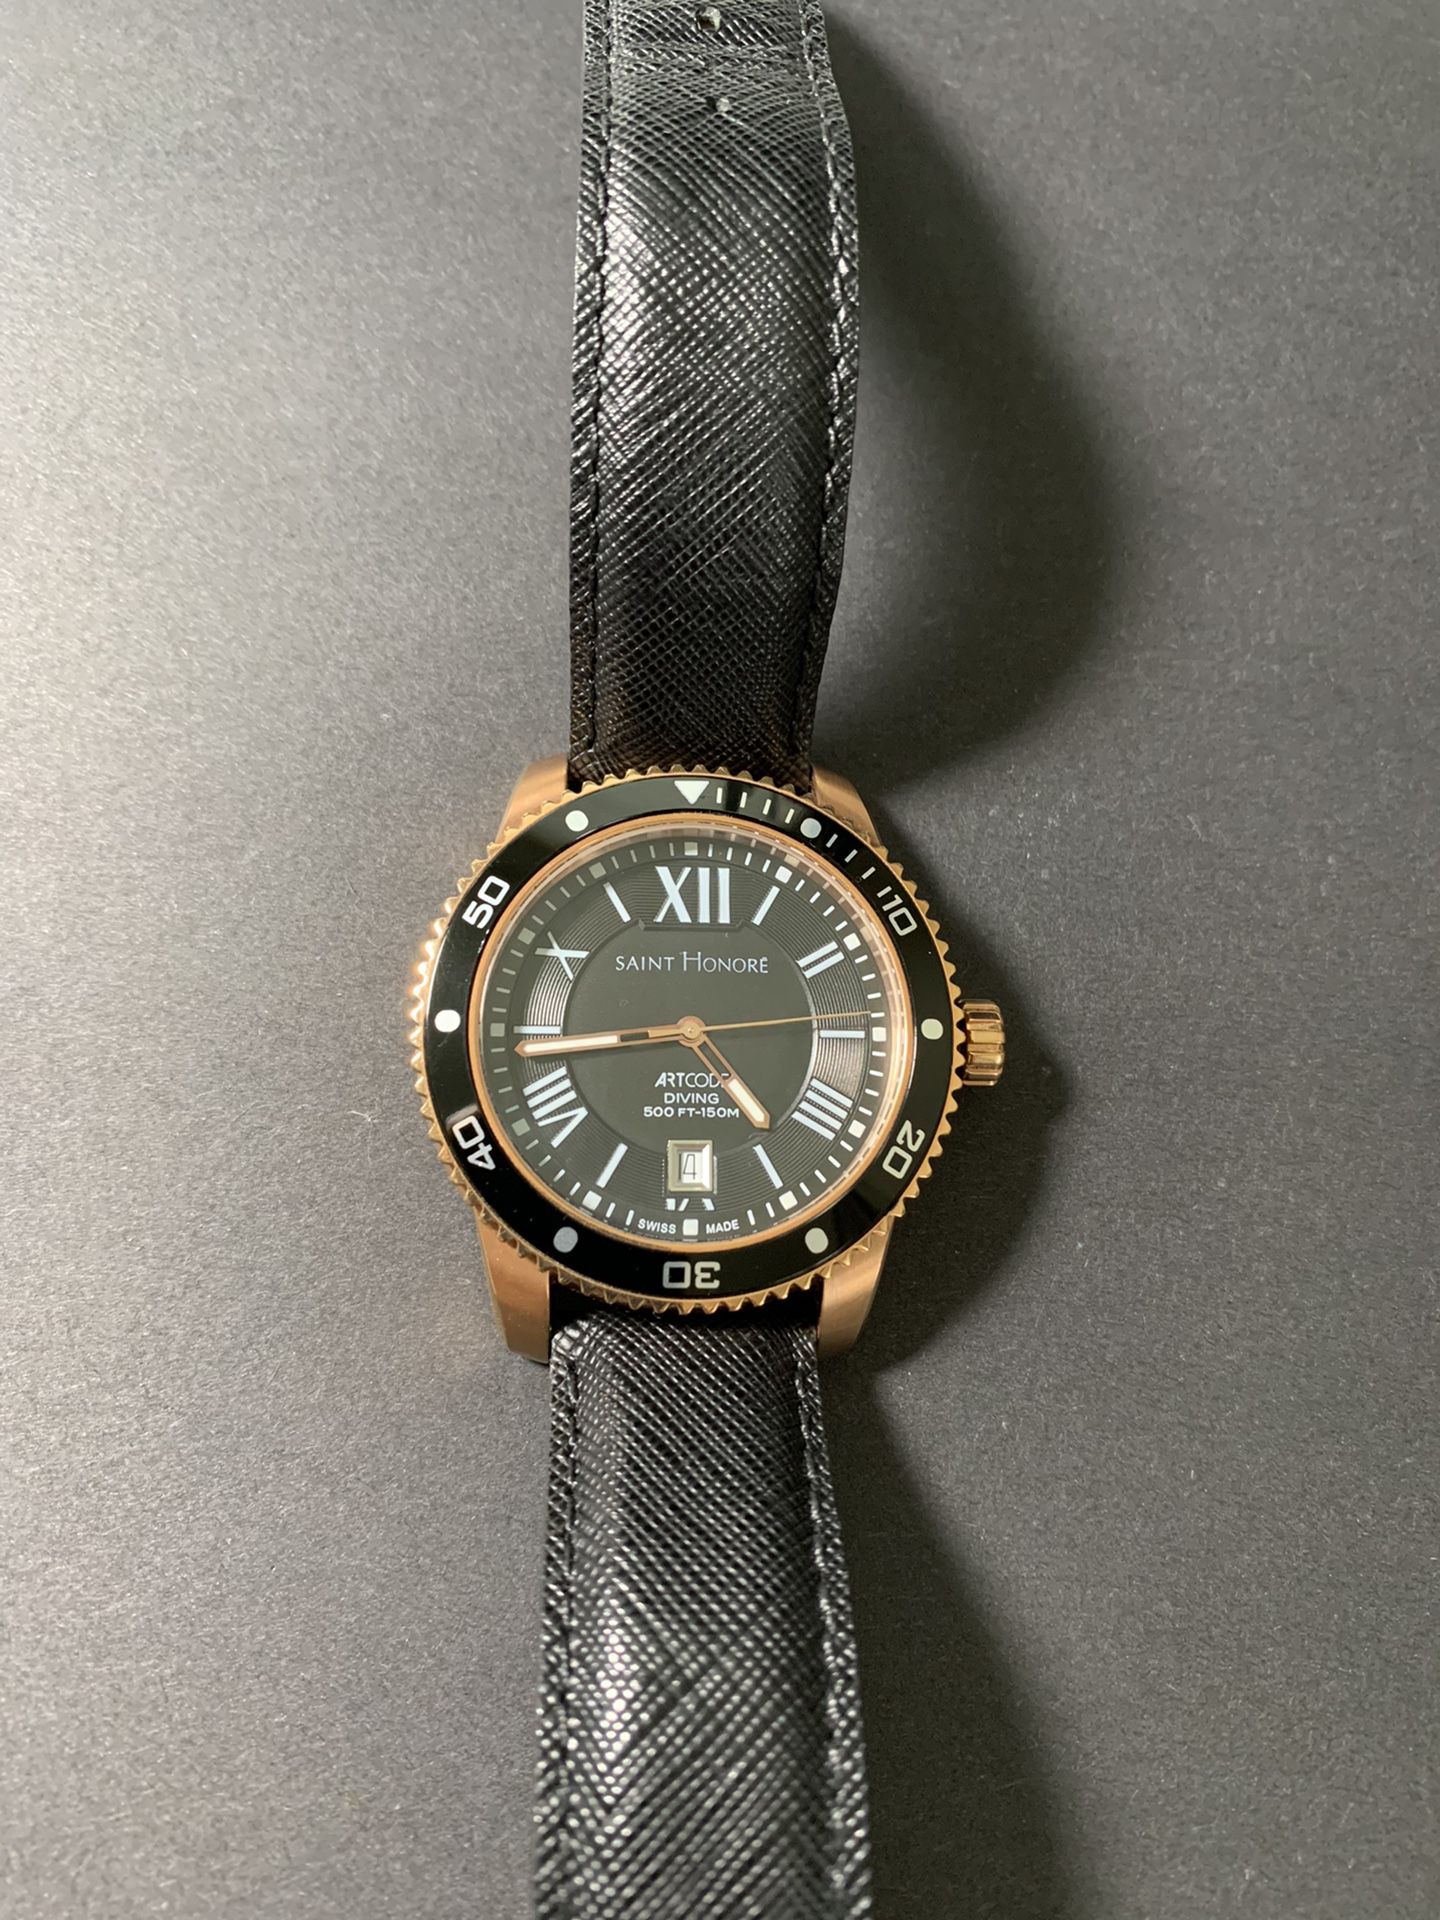 A Beautiful Black And Gold Mens Watch